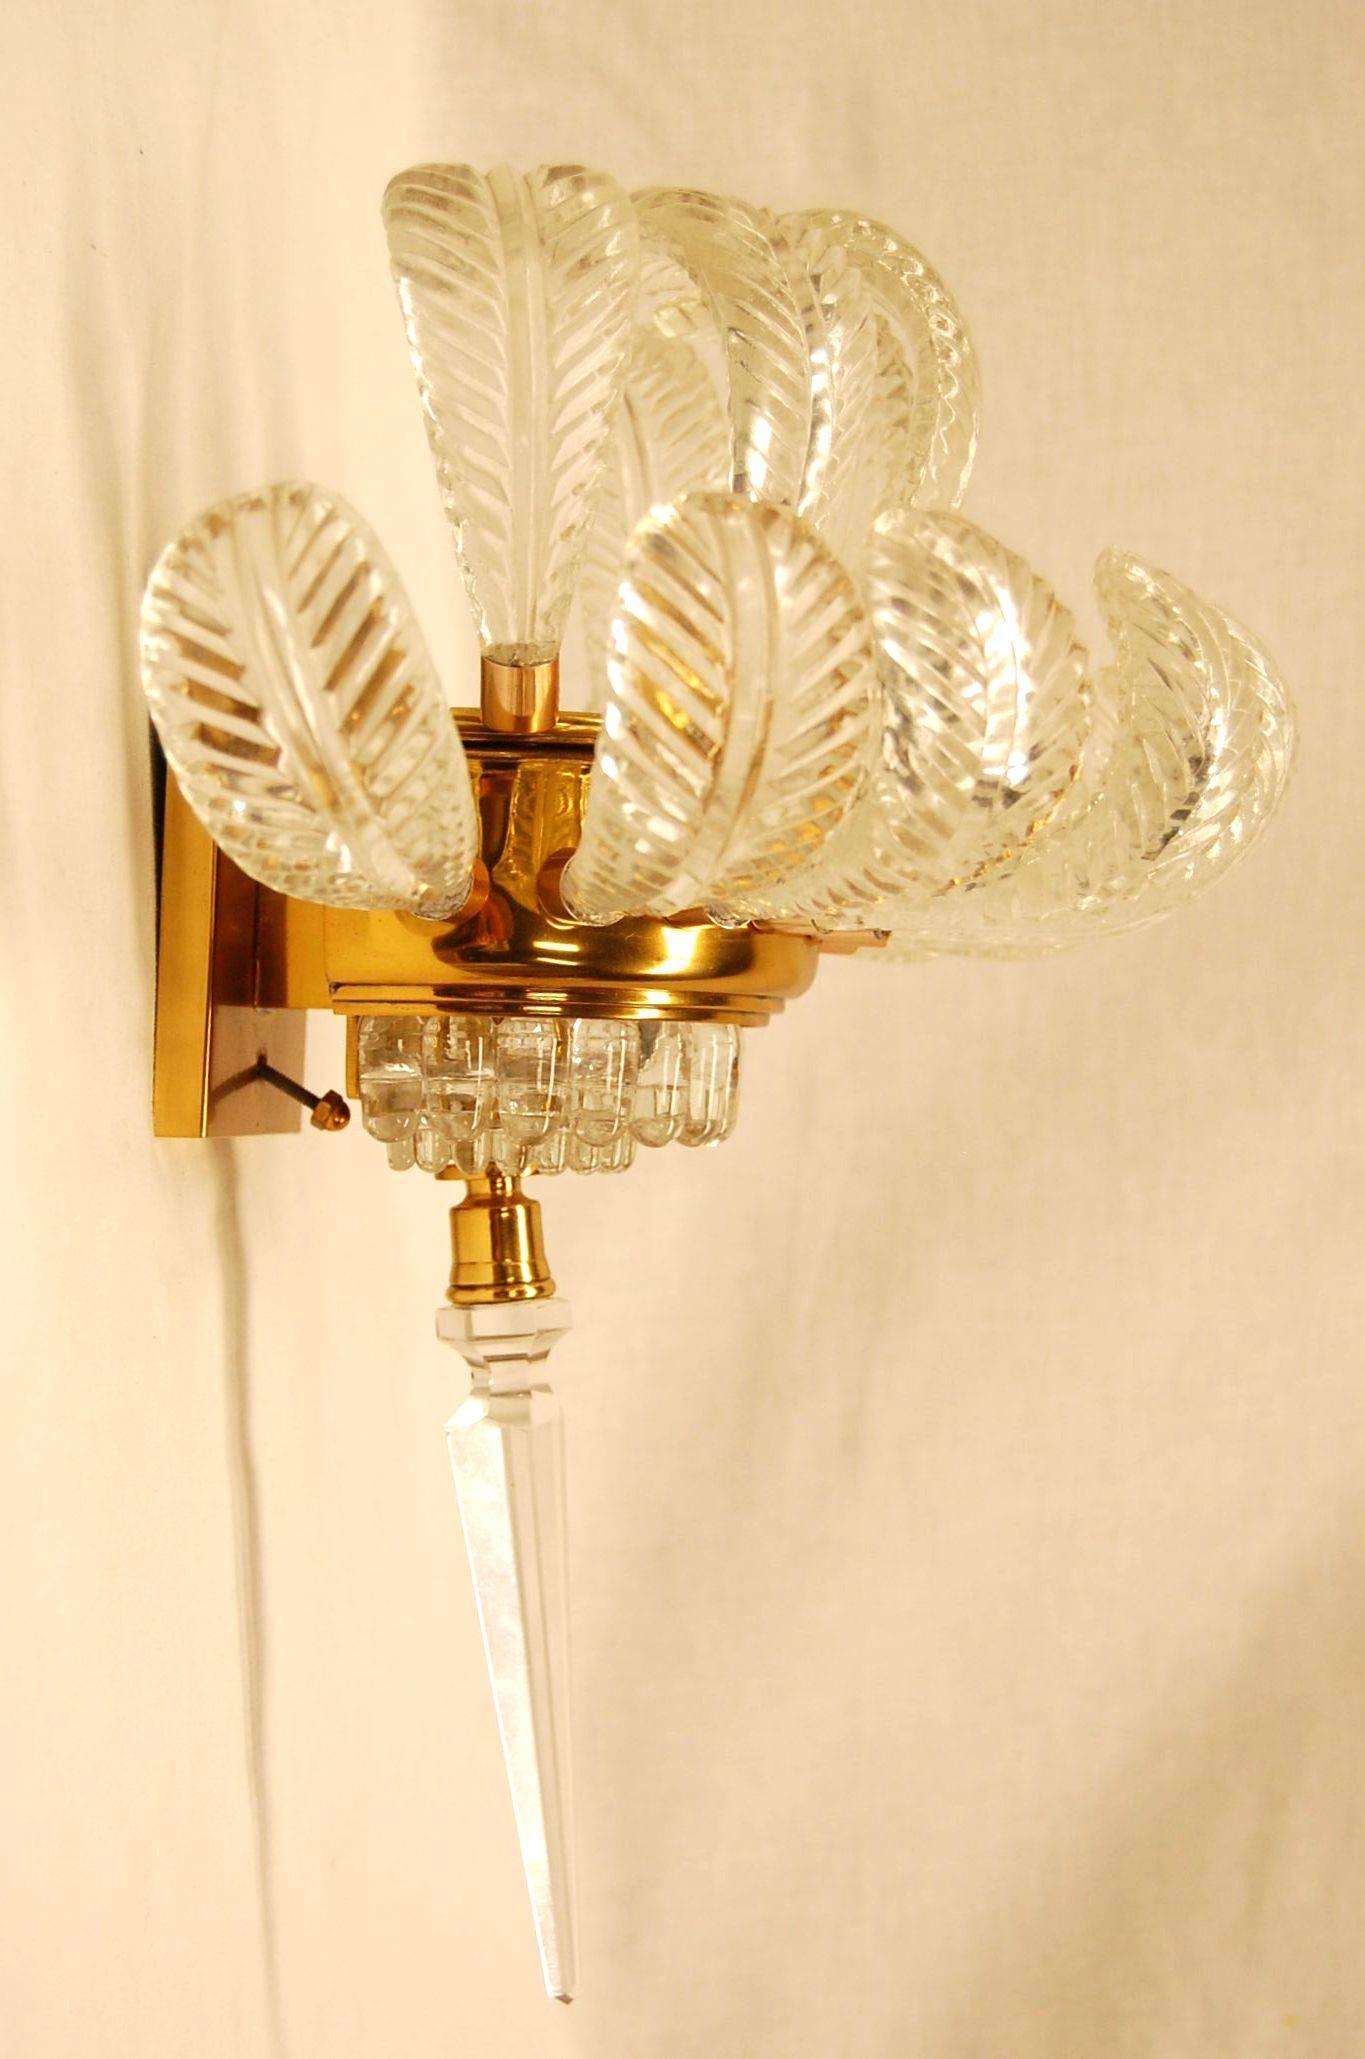 Art Deco demilune glass wall sconces, pair, circa 1930s, possibly Czech Republic in origin. Cleaned and rewired in the 1990s.